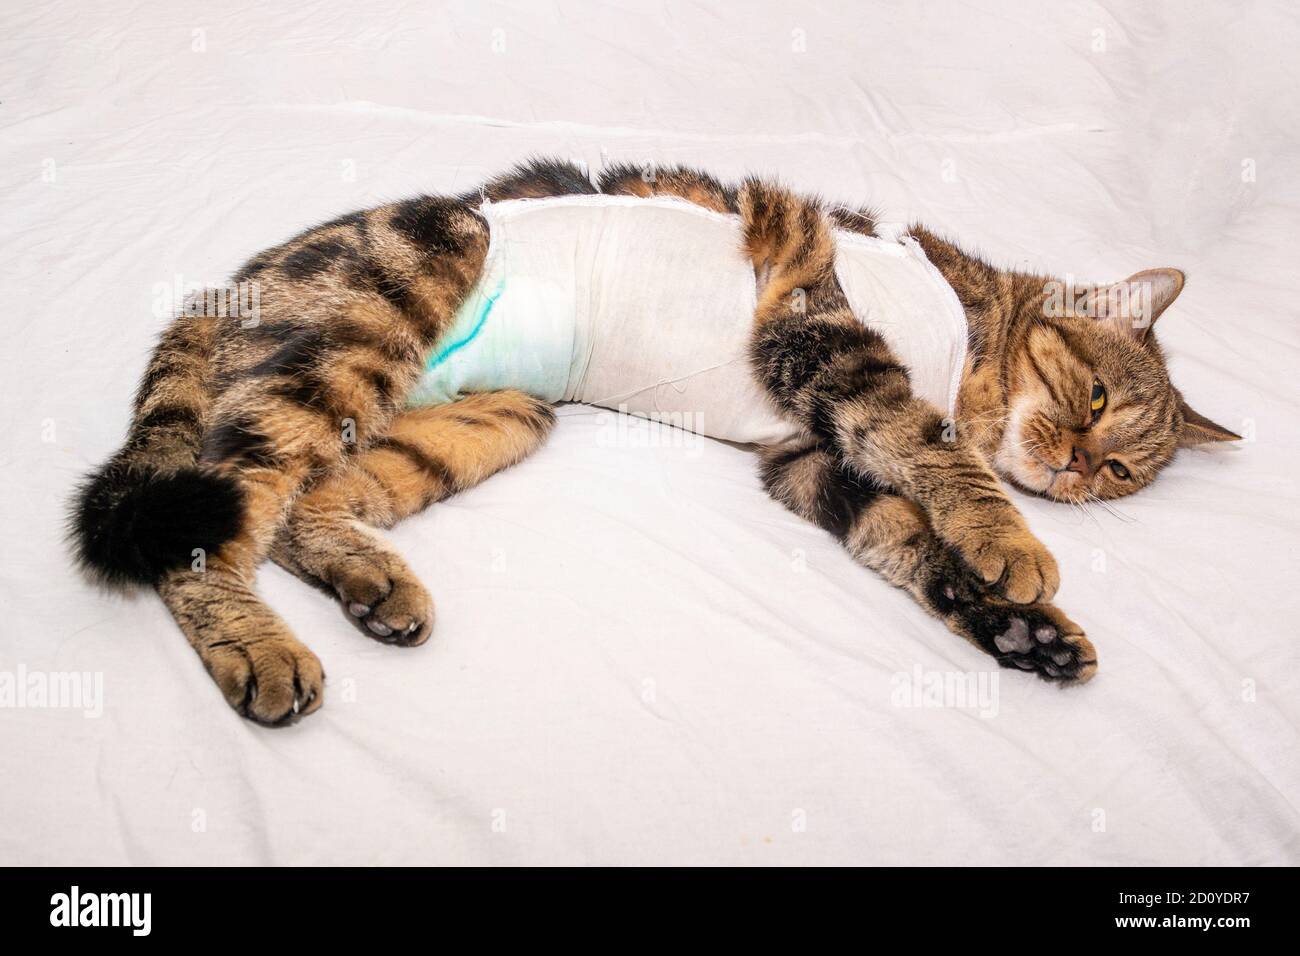 A British cat lies on a white sheet after surgery with the color black marble tabby l Stock Photo